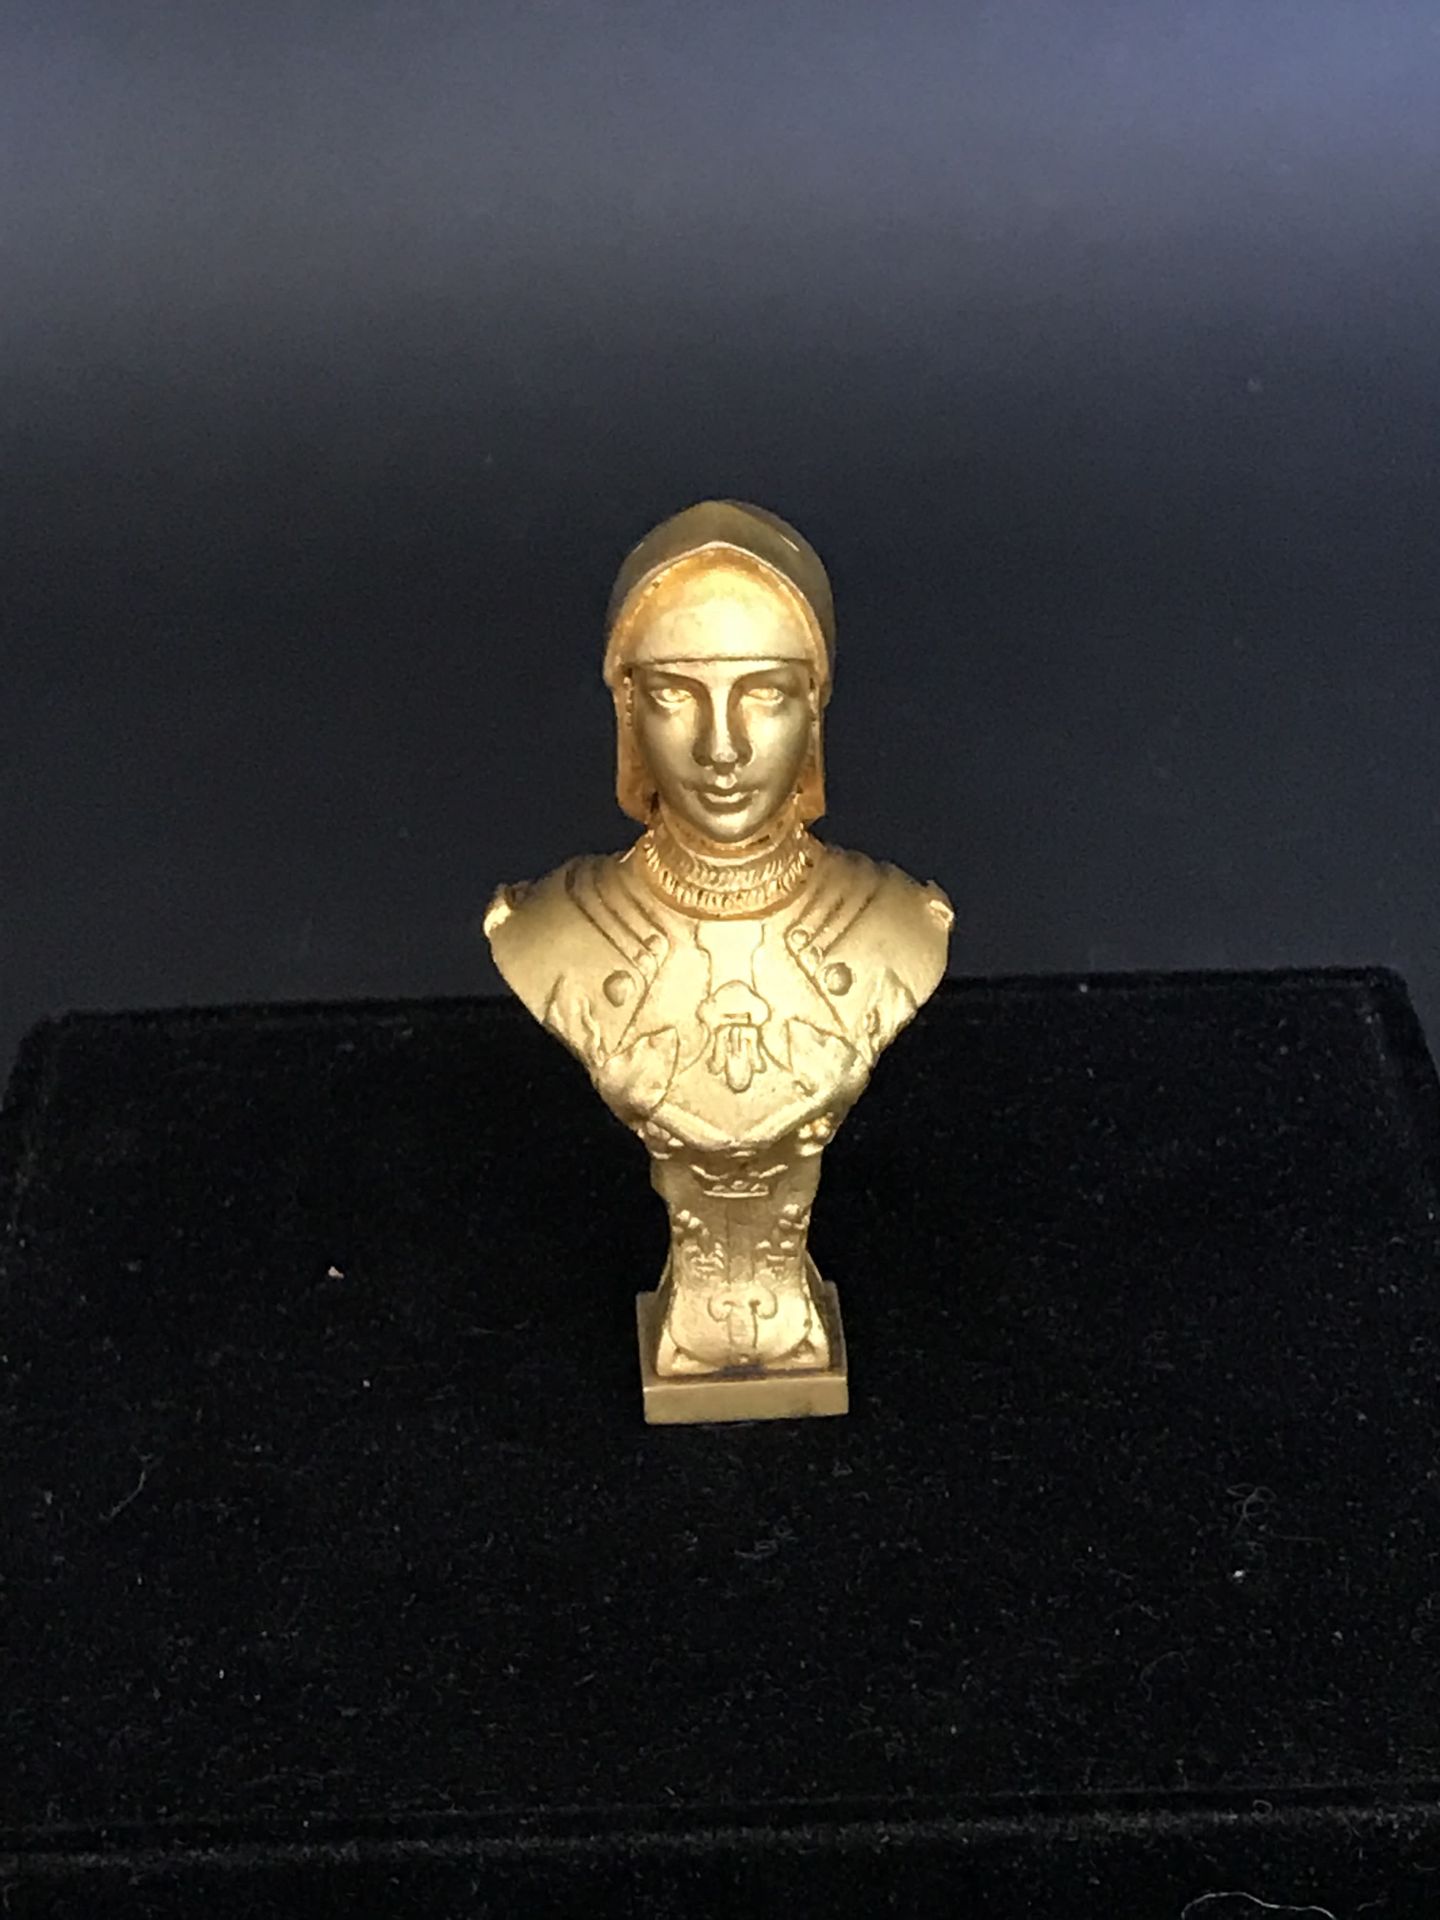 Null STAMP 

in gilt bronze representing JEANNE D'ARC 

RM

Circa 1900